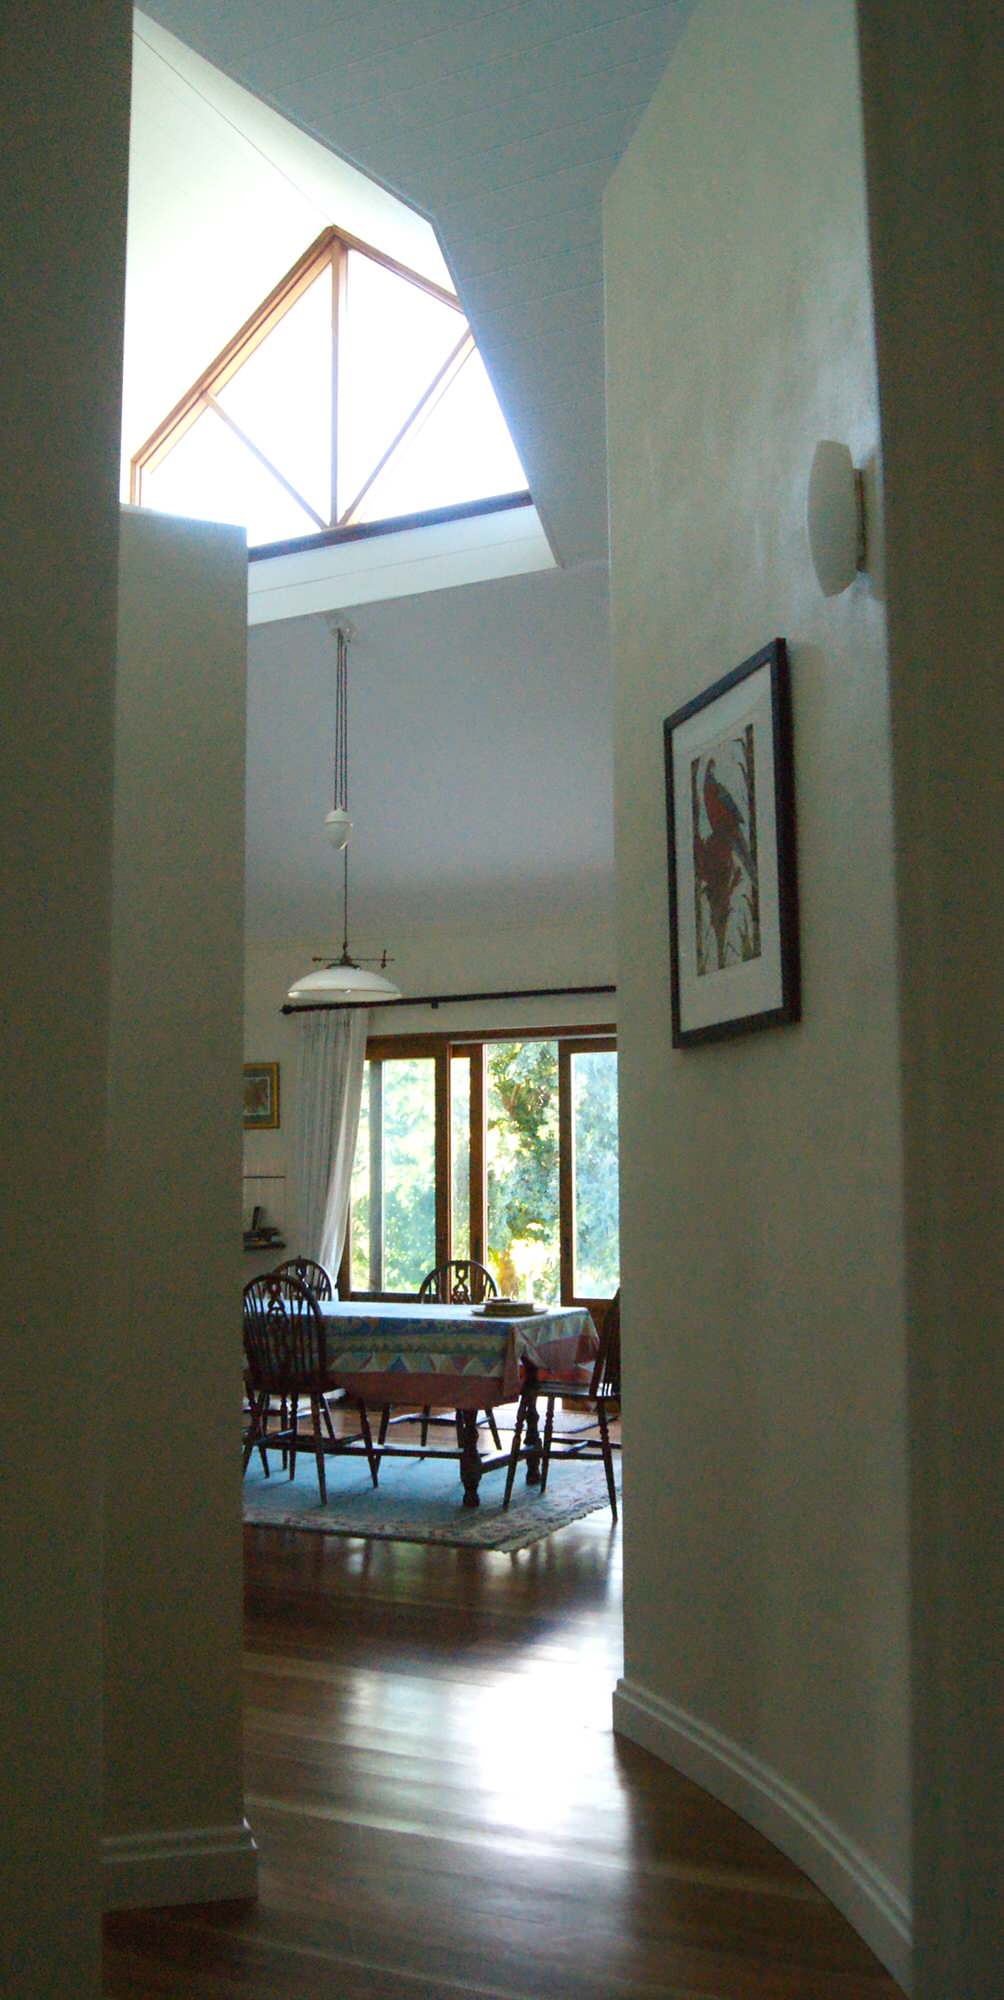 View into dining room